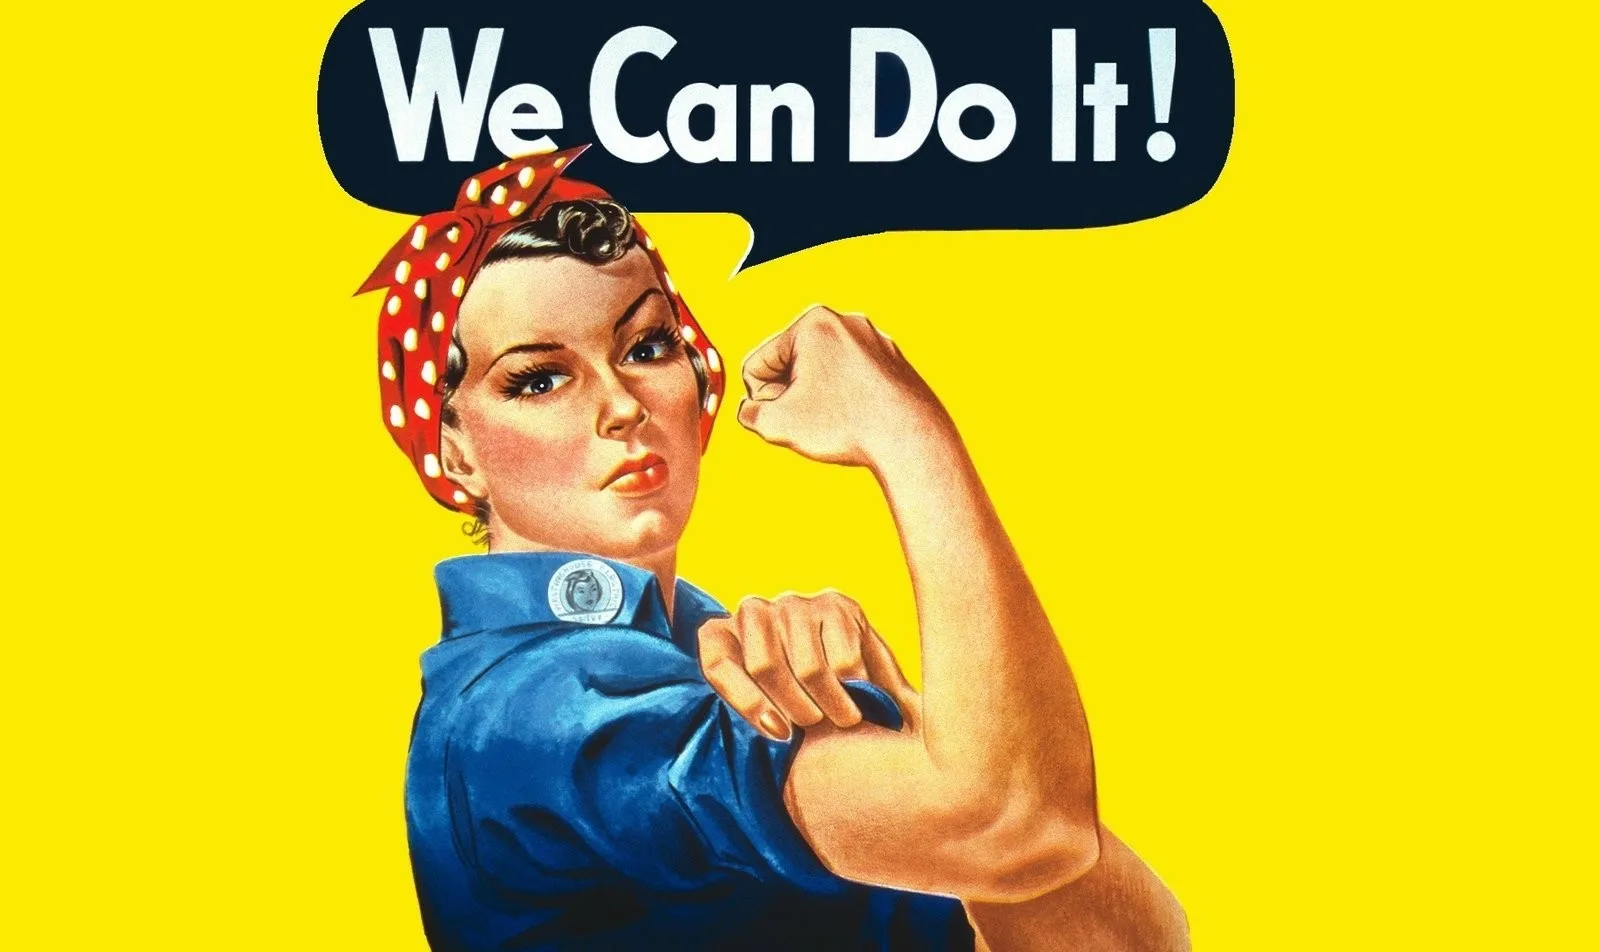 We can t help it. Yes we can do it плакат. Феминизм we can do it. Постер we can do it. You can do it плакат.